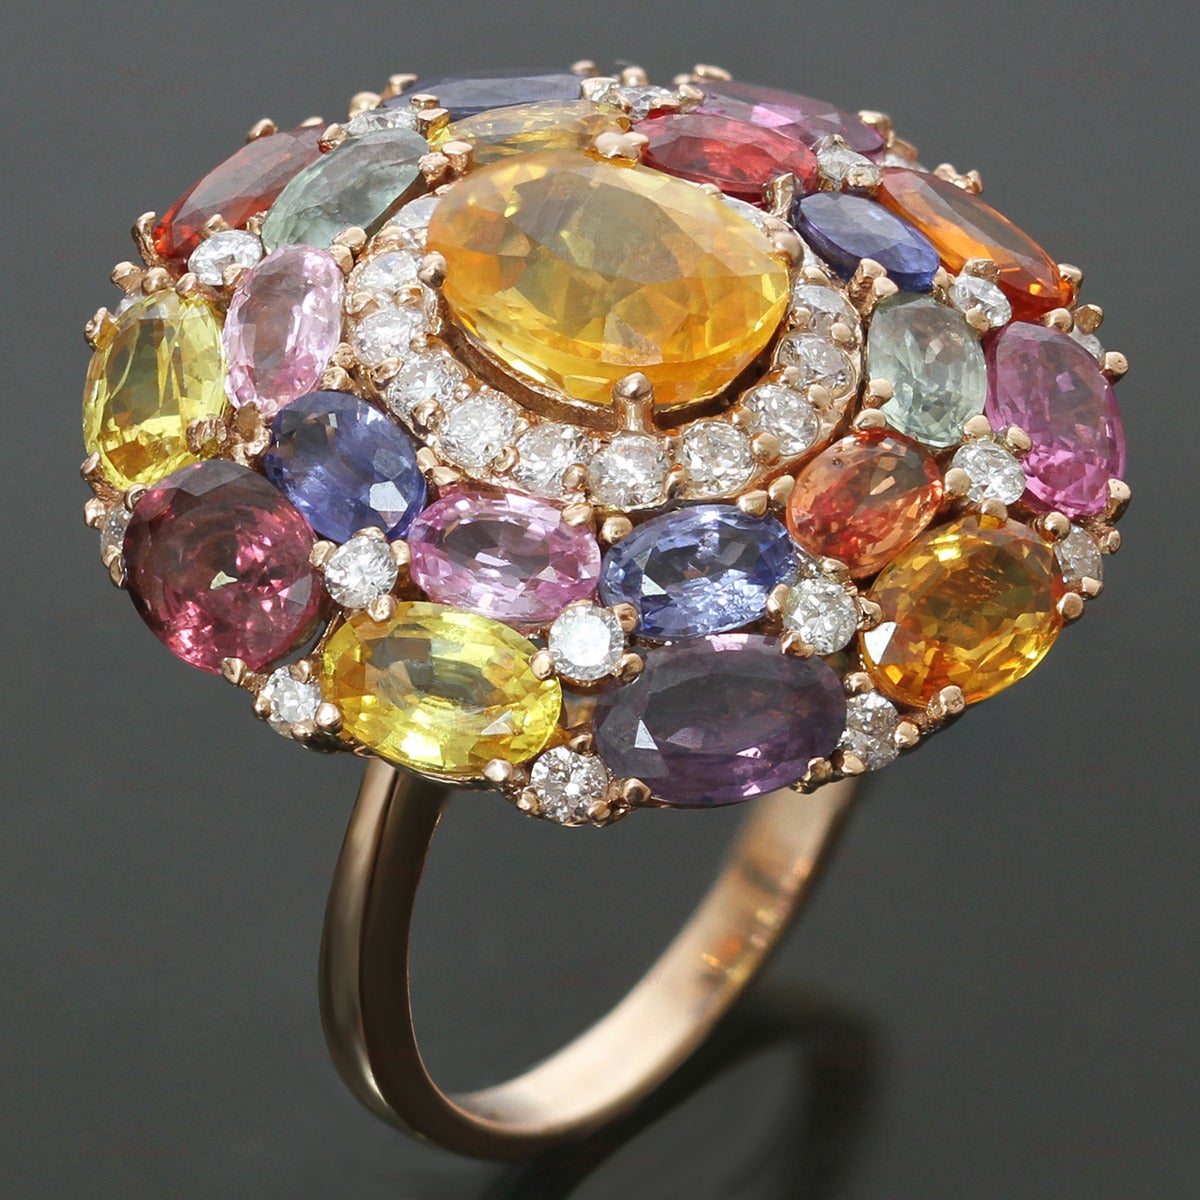 This modern Italian ring is made in 18k rose gold and set with a stunningly colorful array of natural faceted oval sapphires - 20 sapphires of an estimated 14.5 carats, 1 center sapphire of an estimated 2.5 carats, and 30 diamonds of an estimated